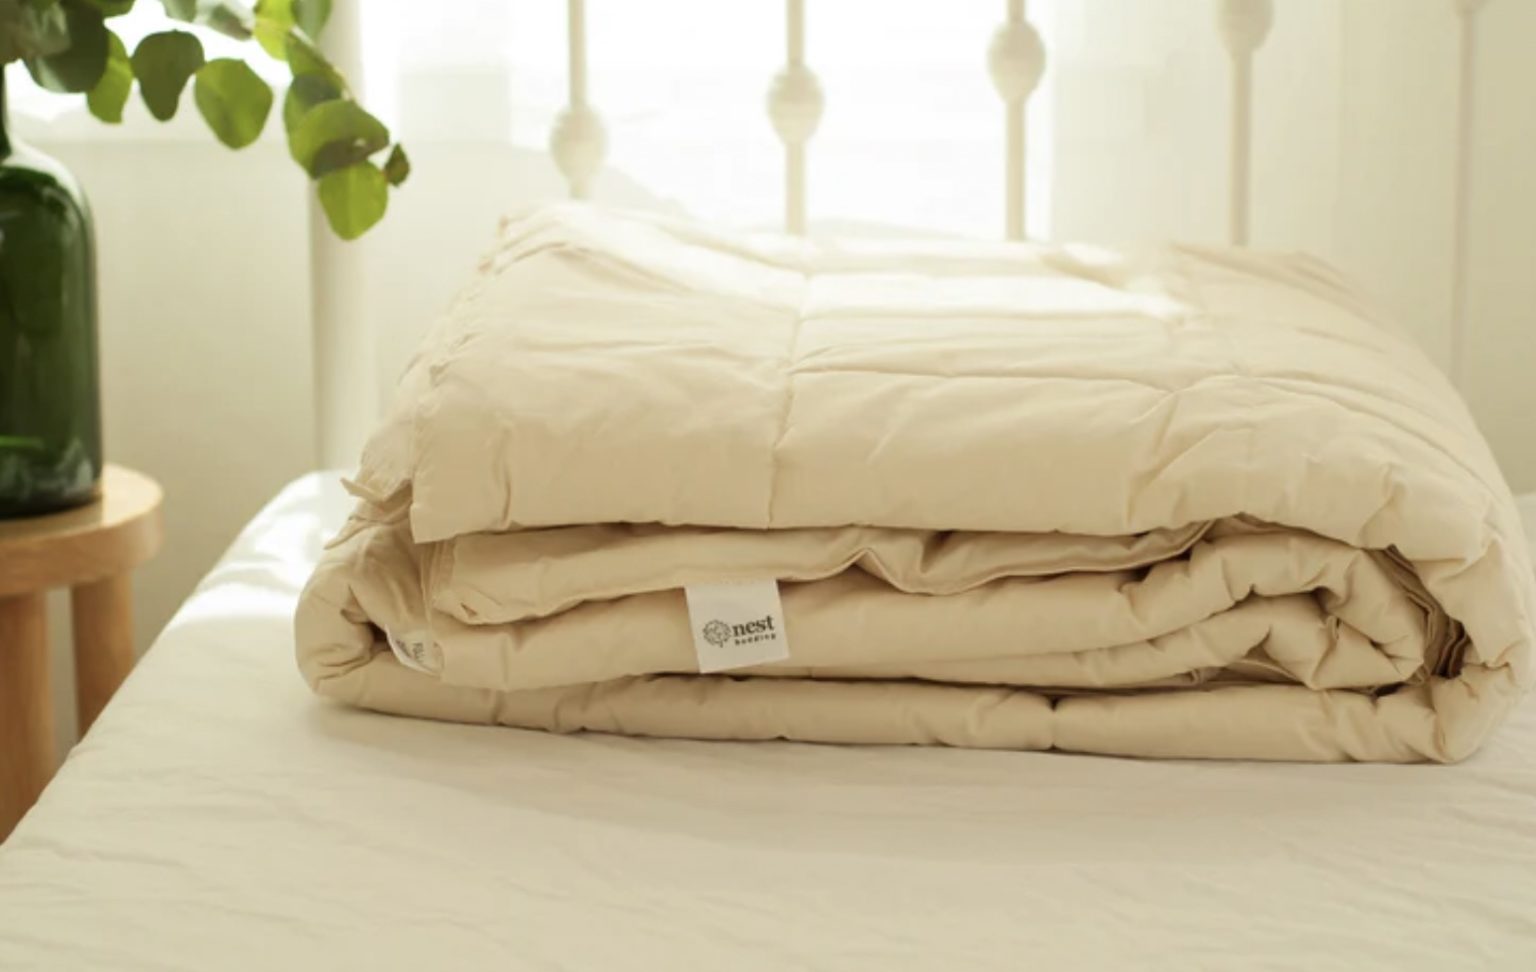 Product page photo of the Nest Bedding Washable Wool Comforter